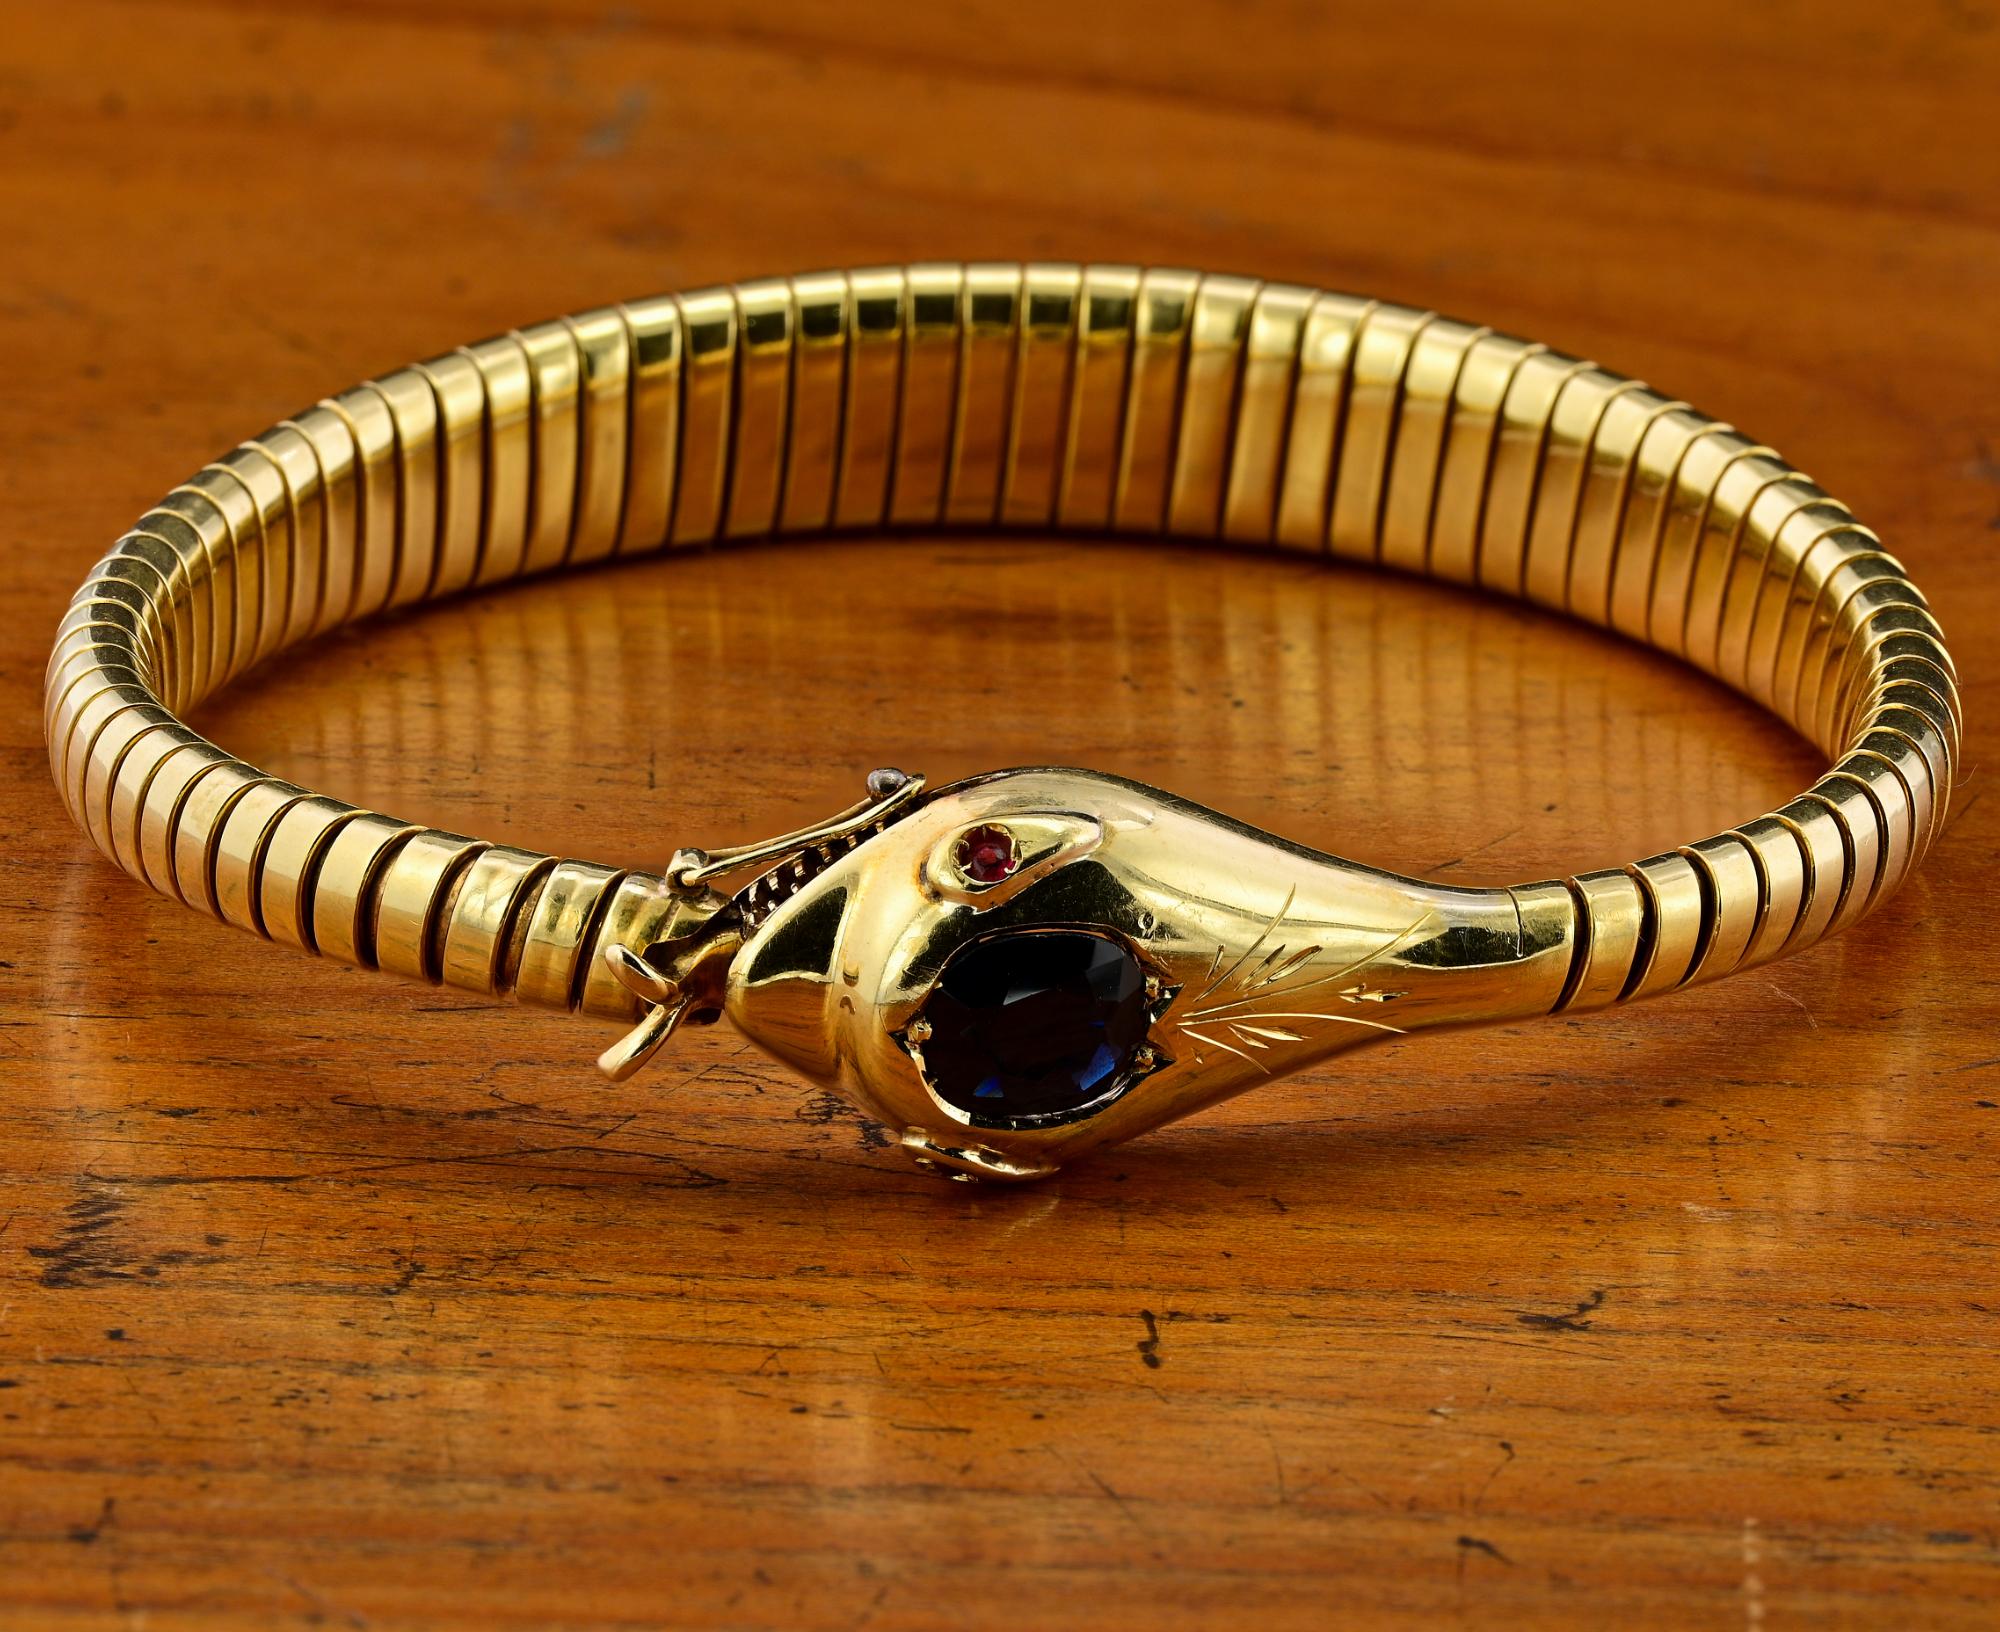 This fascinating Snake bracelet is 1920 circa
Hand crafted of solid 18 KT gold, Italian origin
Traditional past tubogas work terminating with Snake head – weighs 23.3 grams
Snake head is embellished by a superb intense Blue natural unheated Sapphire